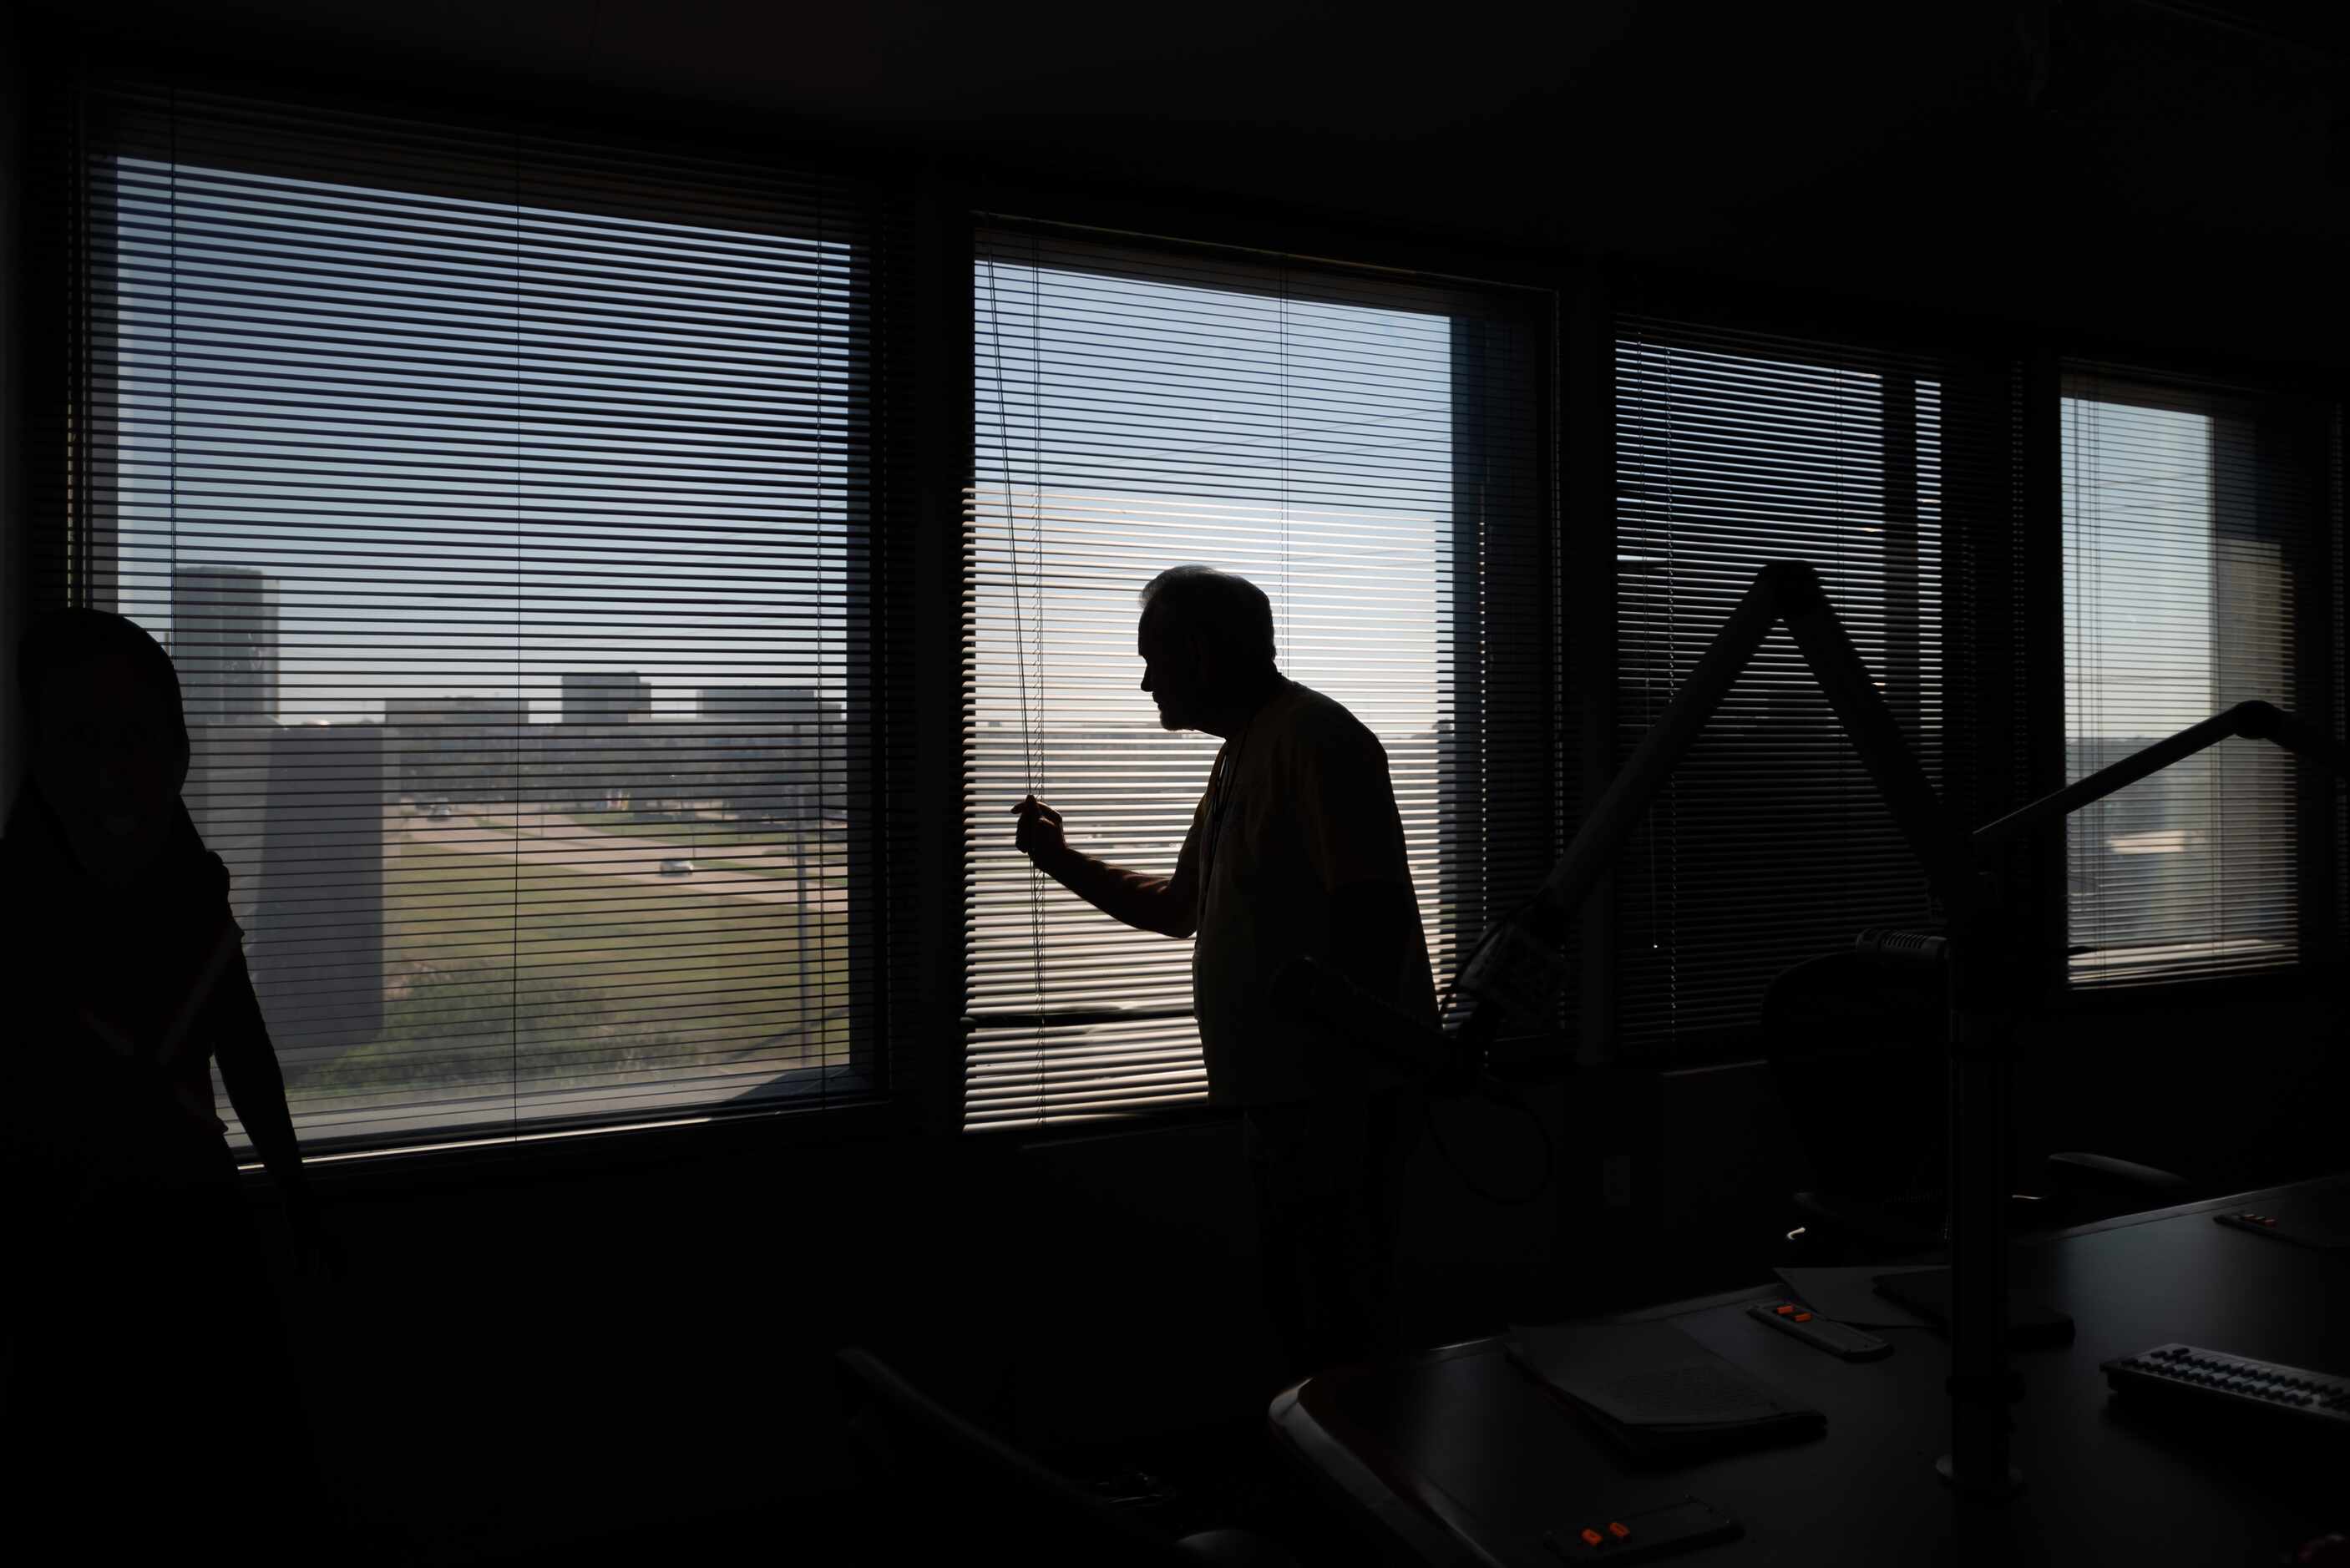 Mike Rhyner closes a set of window blinds as he prepares to host his show, The Downbeat.